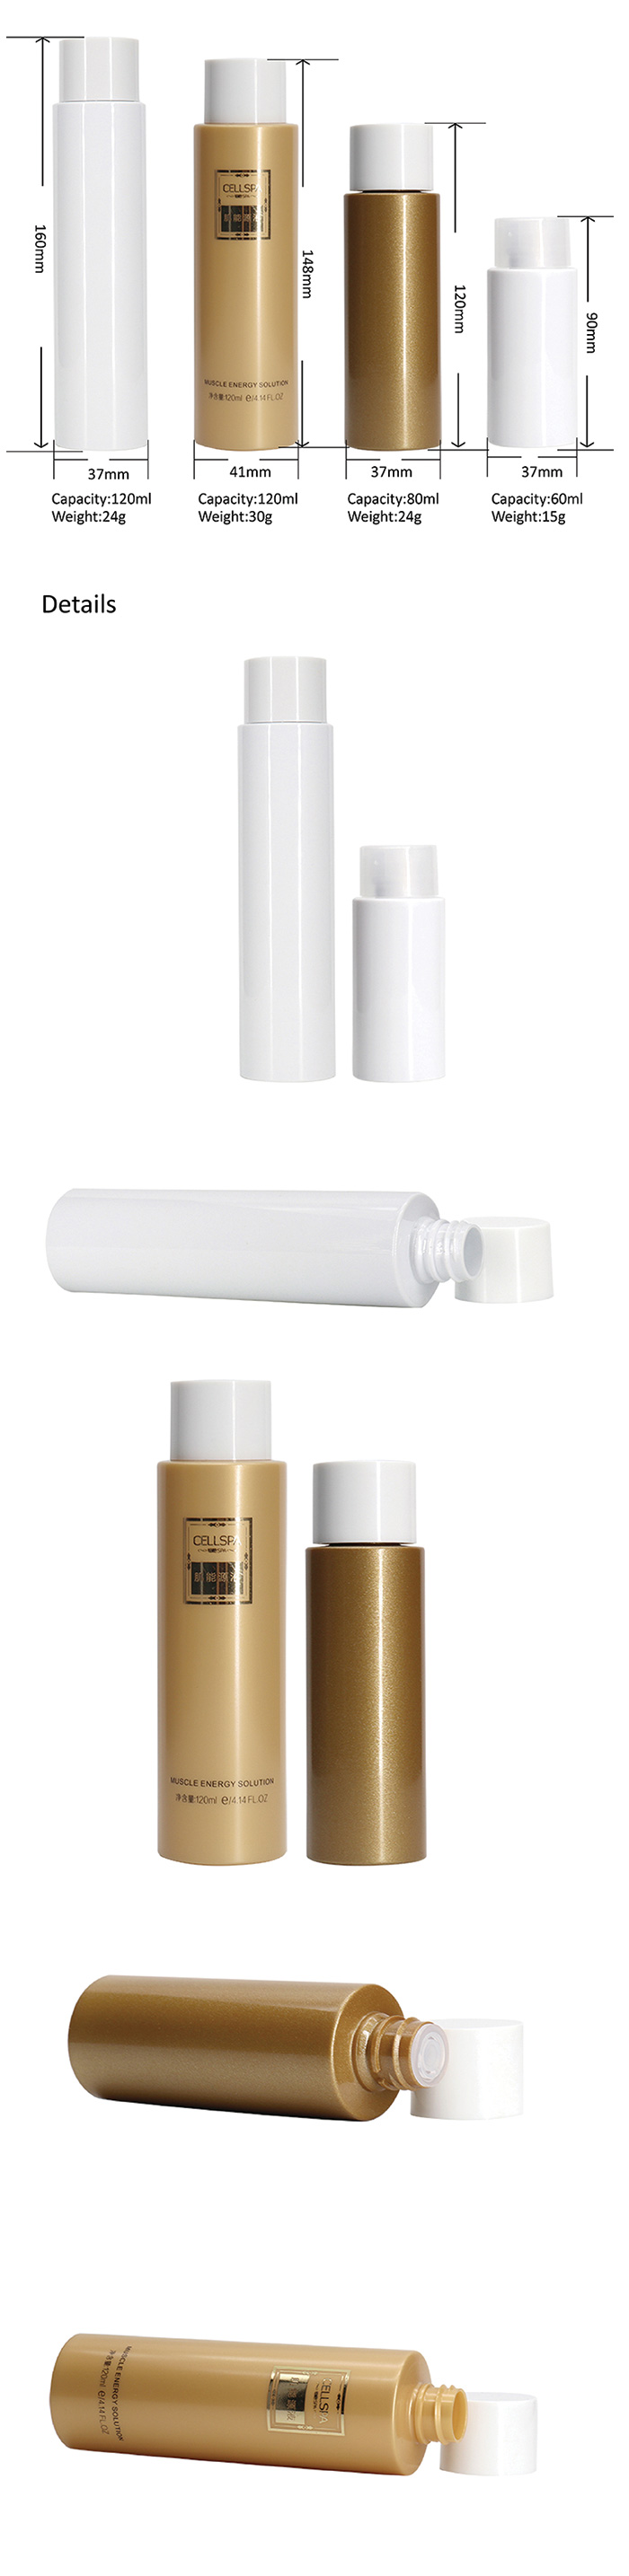 Cosmetic Toner Refillable Bottle Product